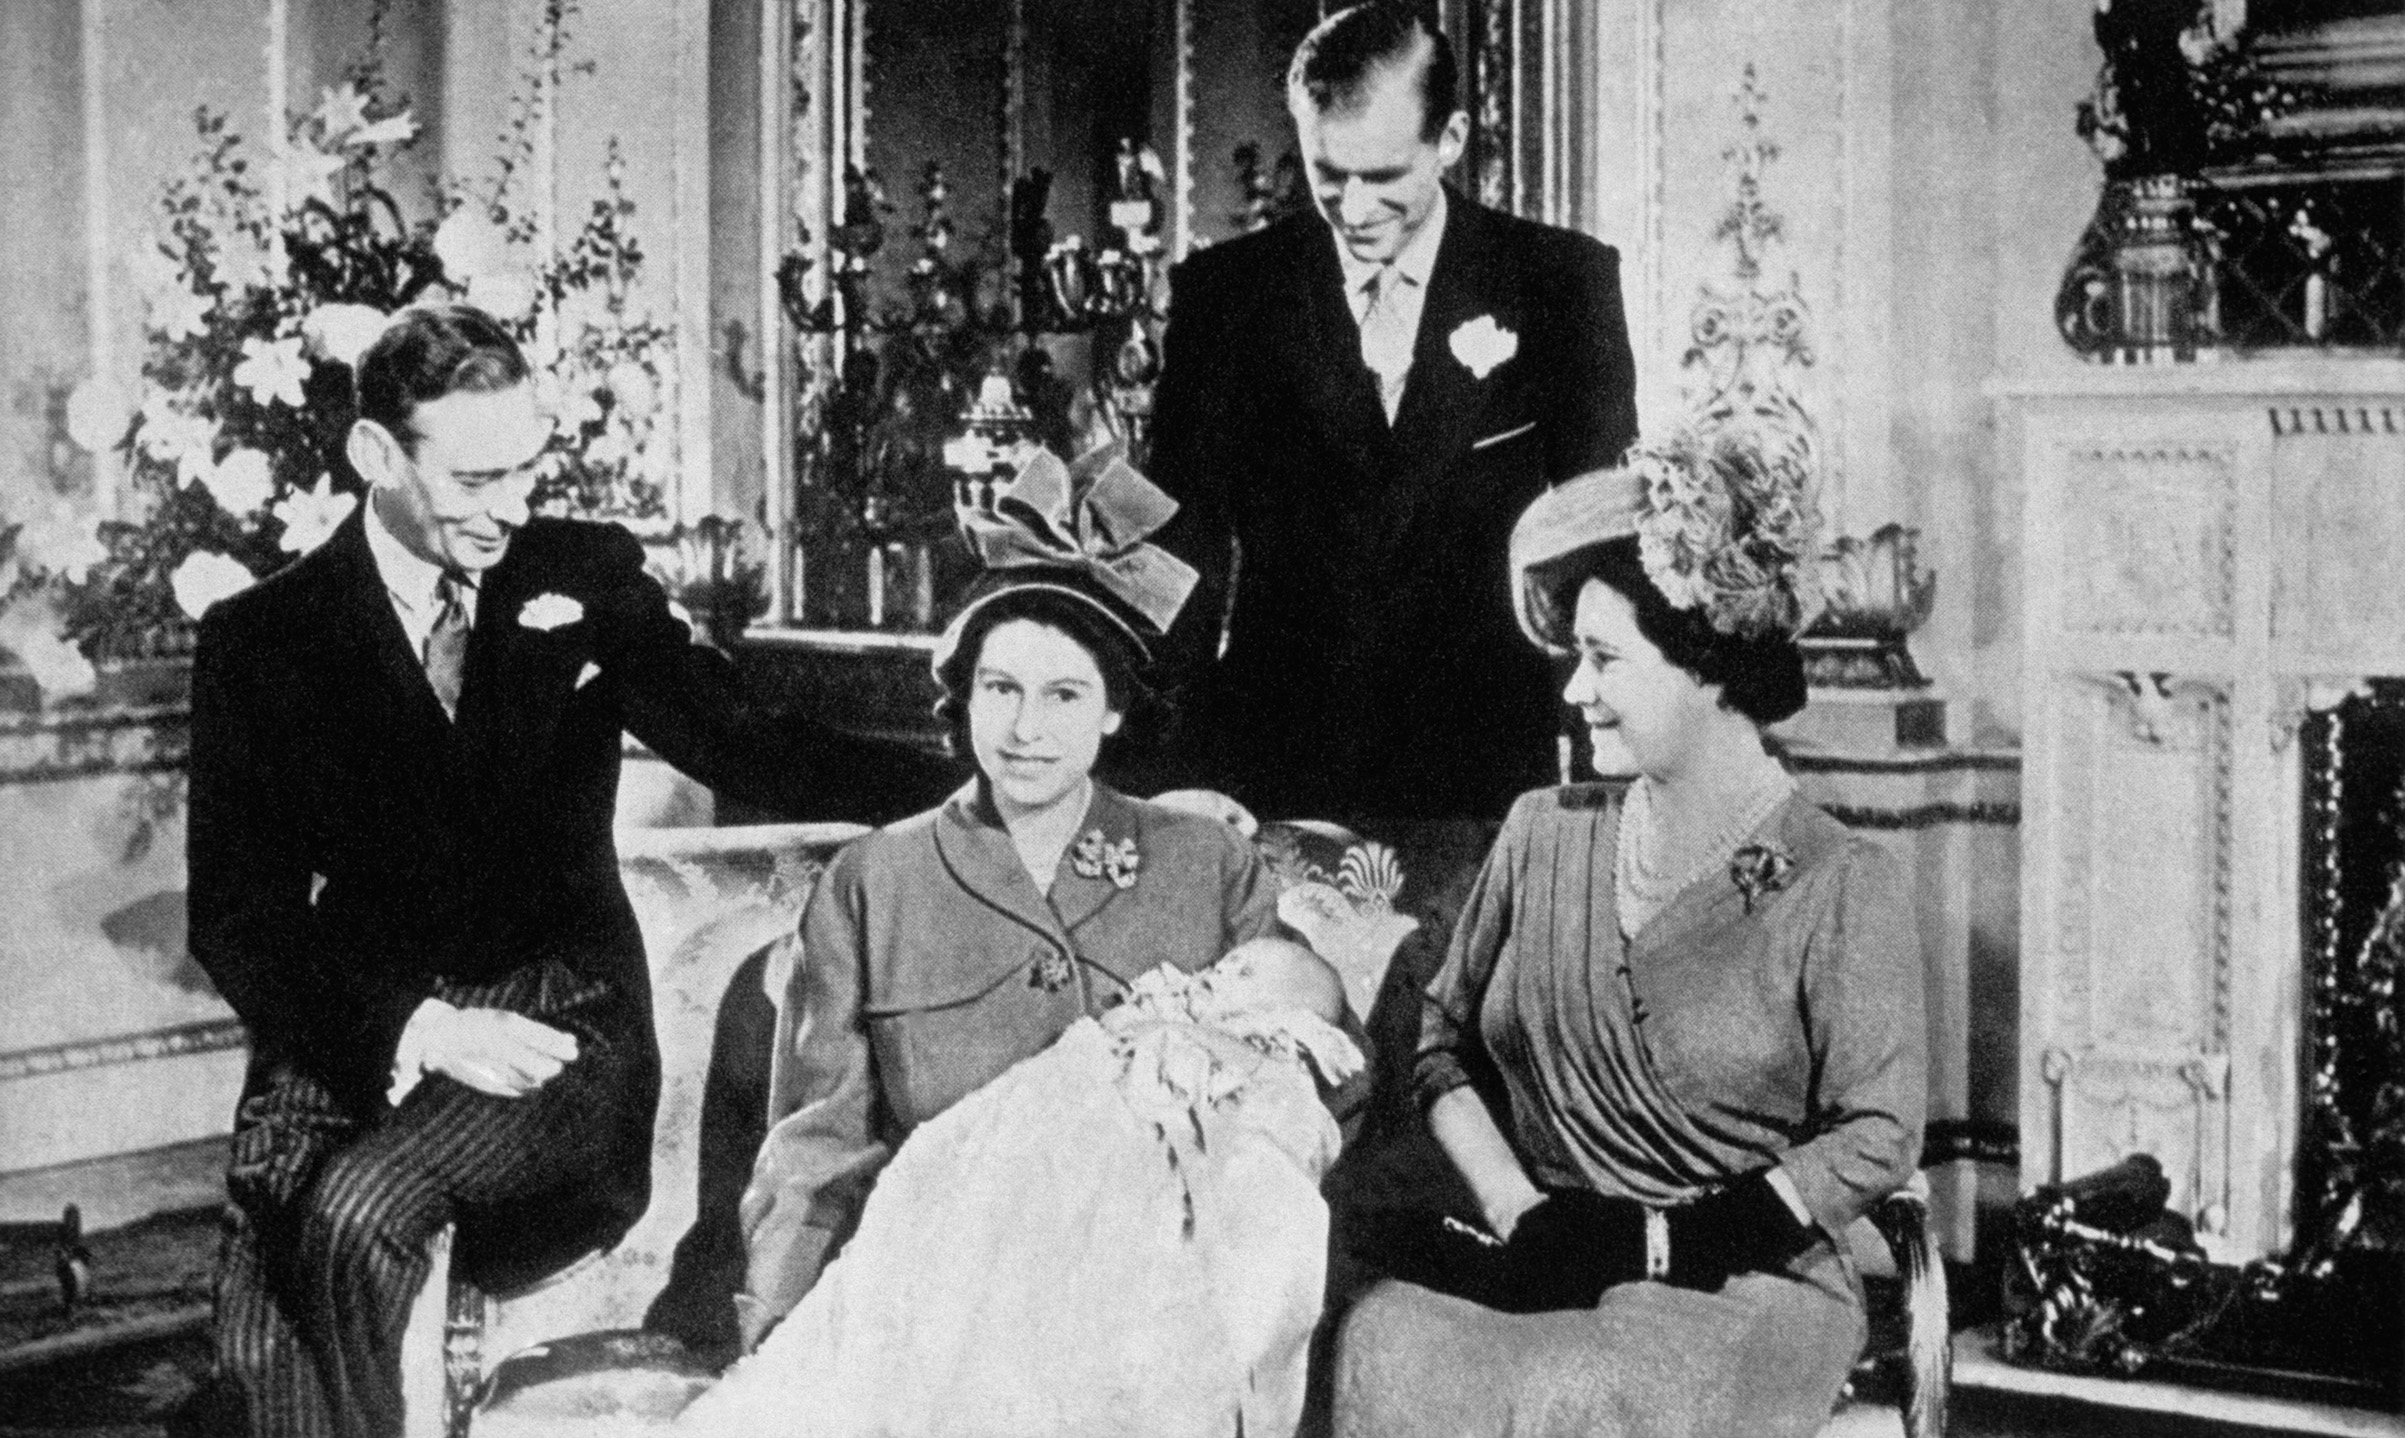 King George VI and his wife Queen Elizabeth, the Princess Elizabeth — the future Queen Elizabeth II — with the Duke of Edinborough and the infant Prince Charles. (API/Gamma-Rapho via Getty Images)